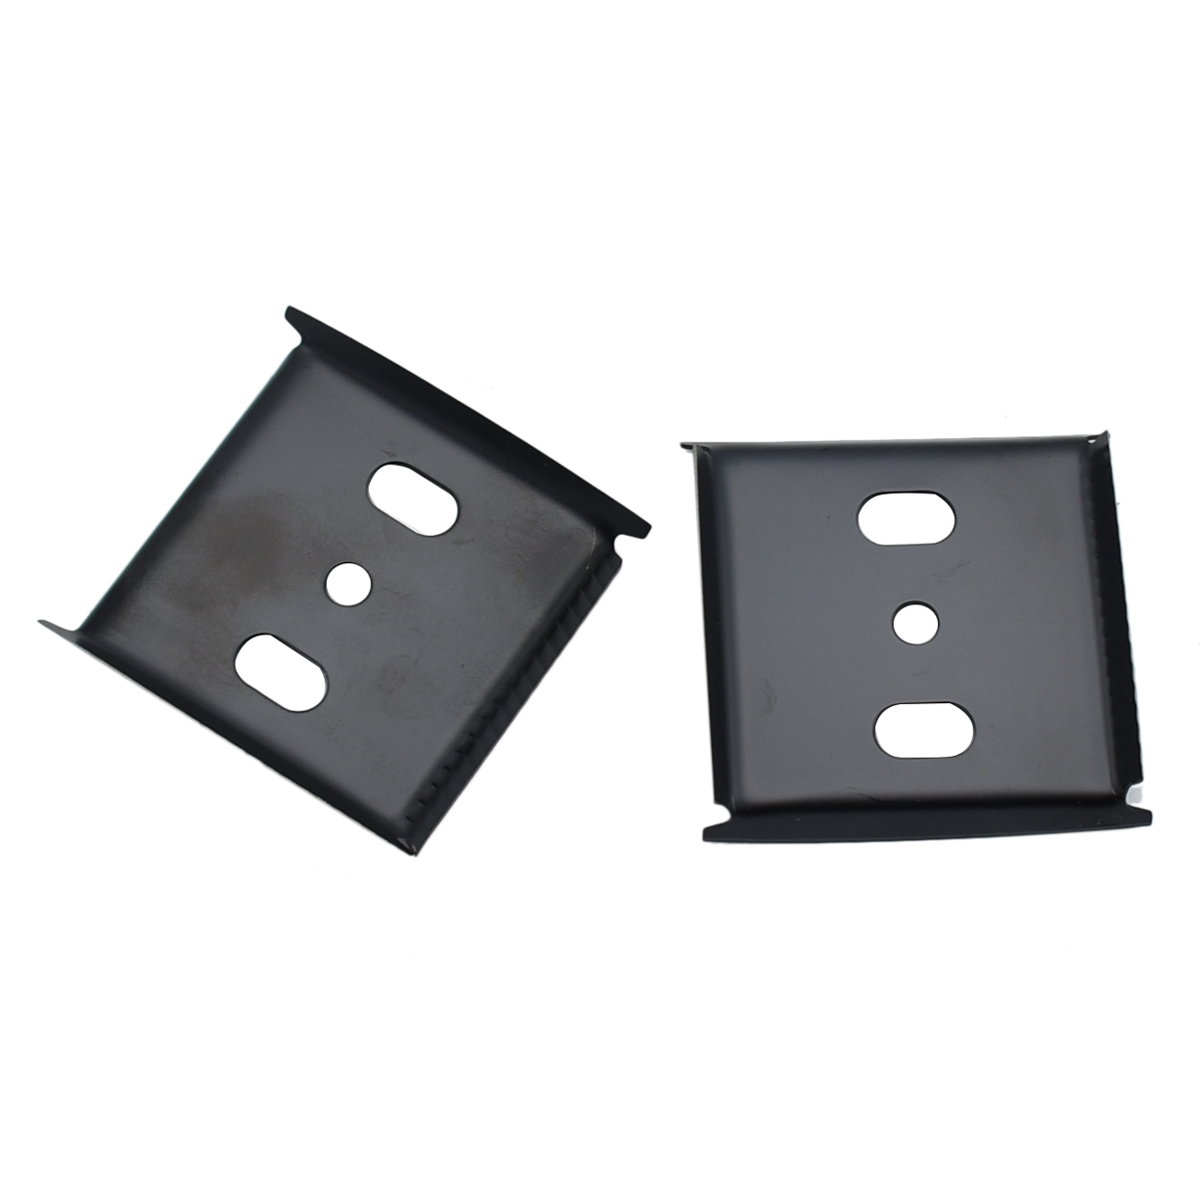 Pack Of 2 Wood Paint Scraper Tool 4 Edge Blades For G4515 Or Similar